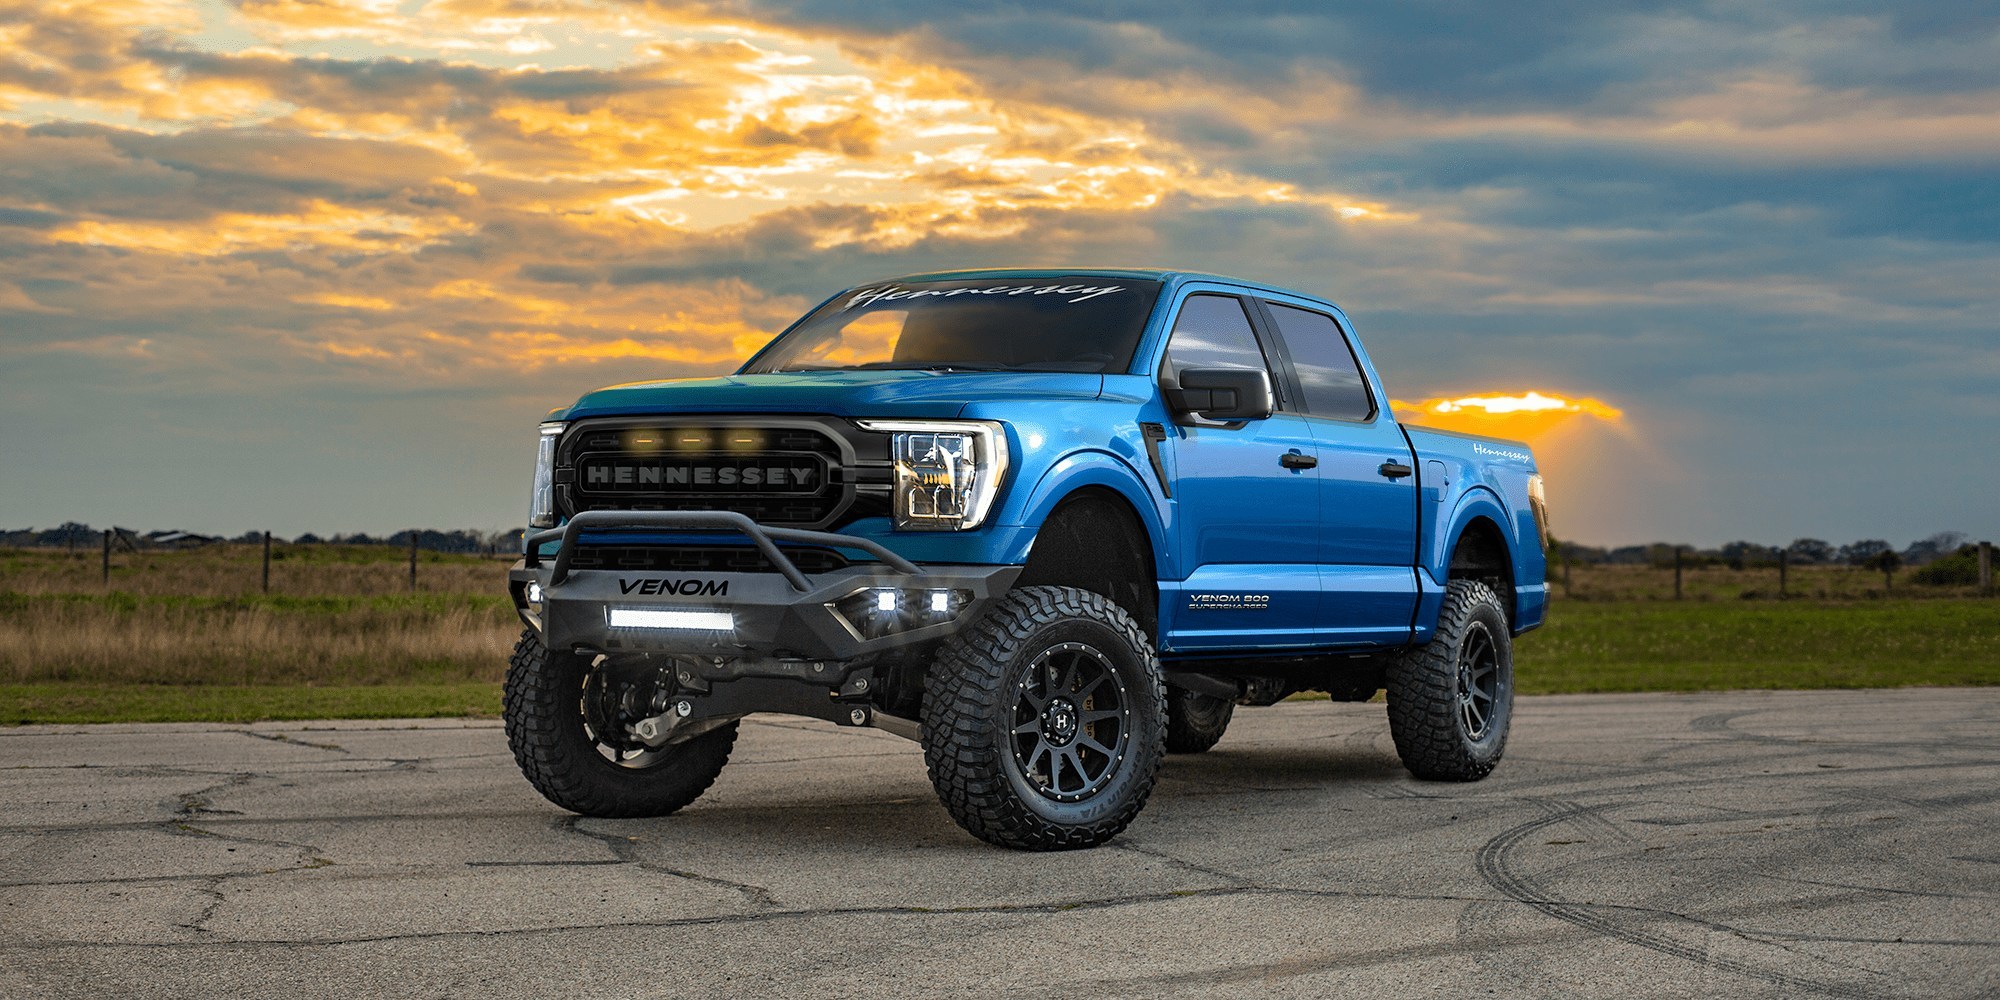 Introducing The 2021 HENNESSEY VENOM 800 SUPERCHARGED Ford F-150 Pick-Up Truck